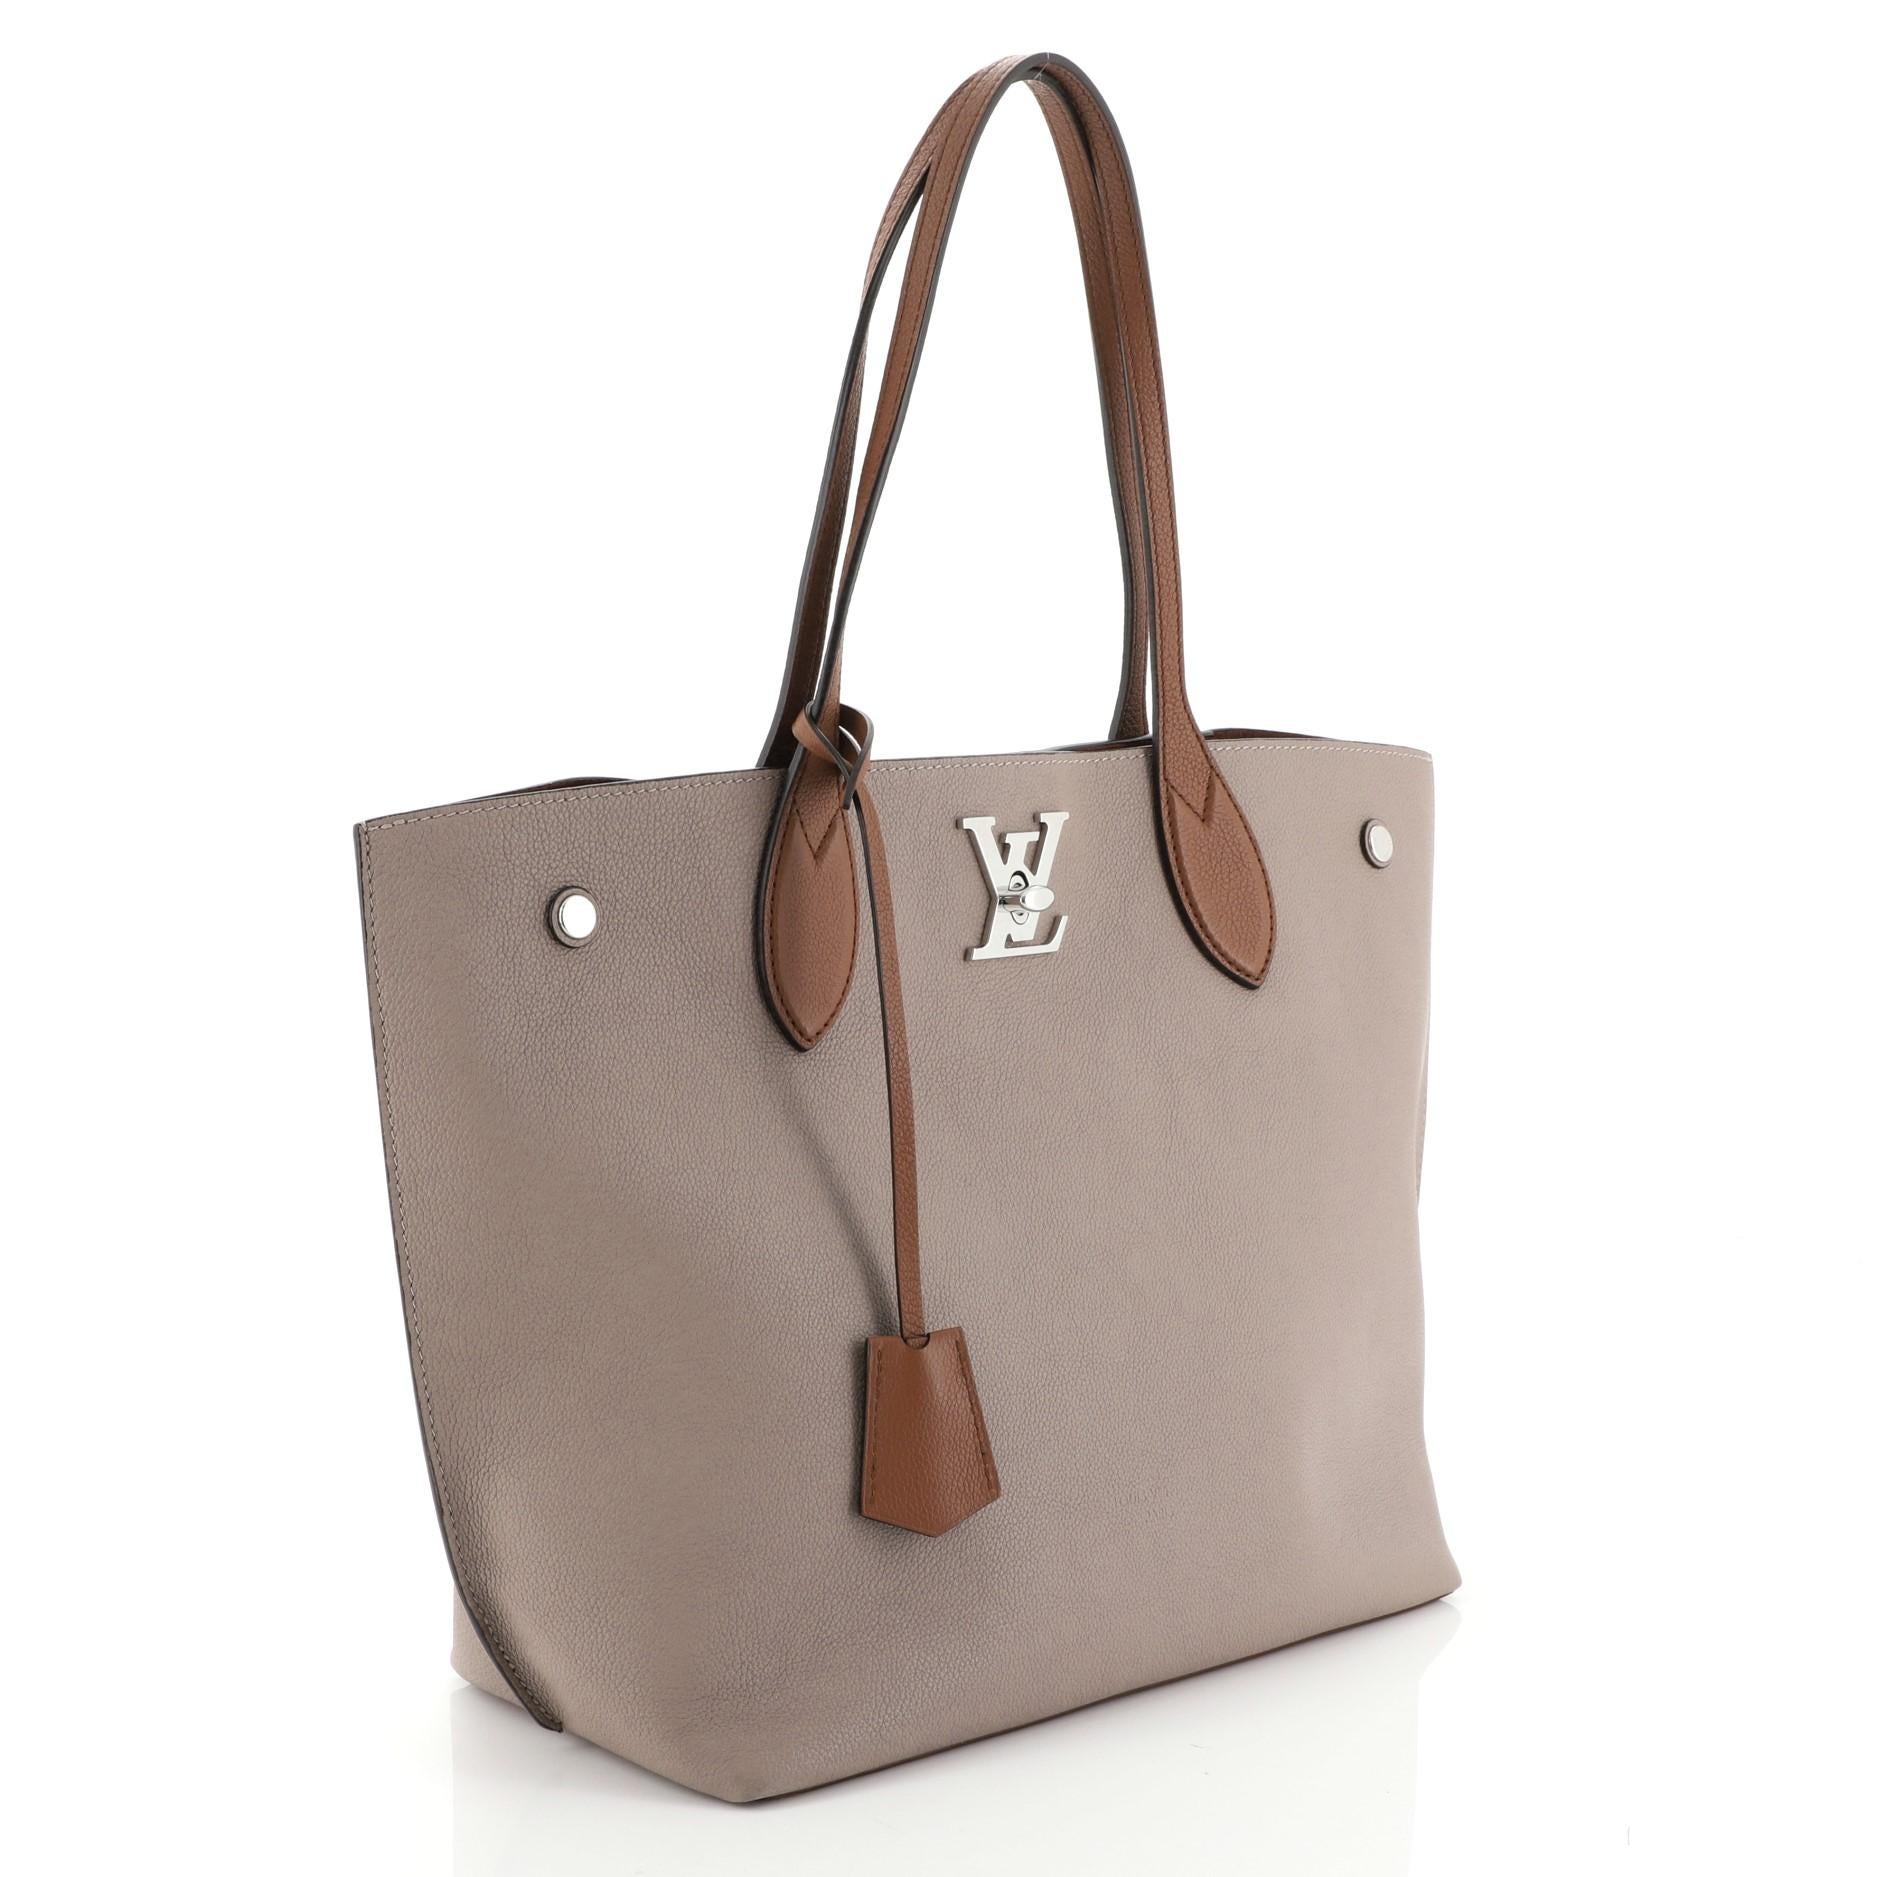 This Louis Vuitton Lockme Go Tote Leather, crafted from brown leather, features dual flat leather handles, LV twist closure, and silver-tone hardware accents. Its turn-lock closure opens to a brown microfiber interior with zip and slip pockets.